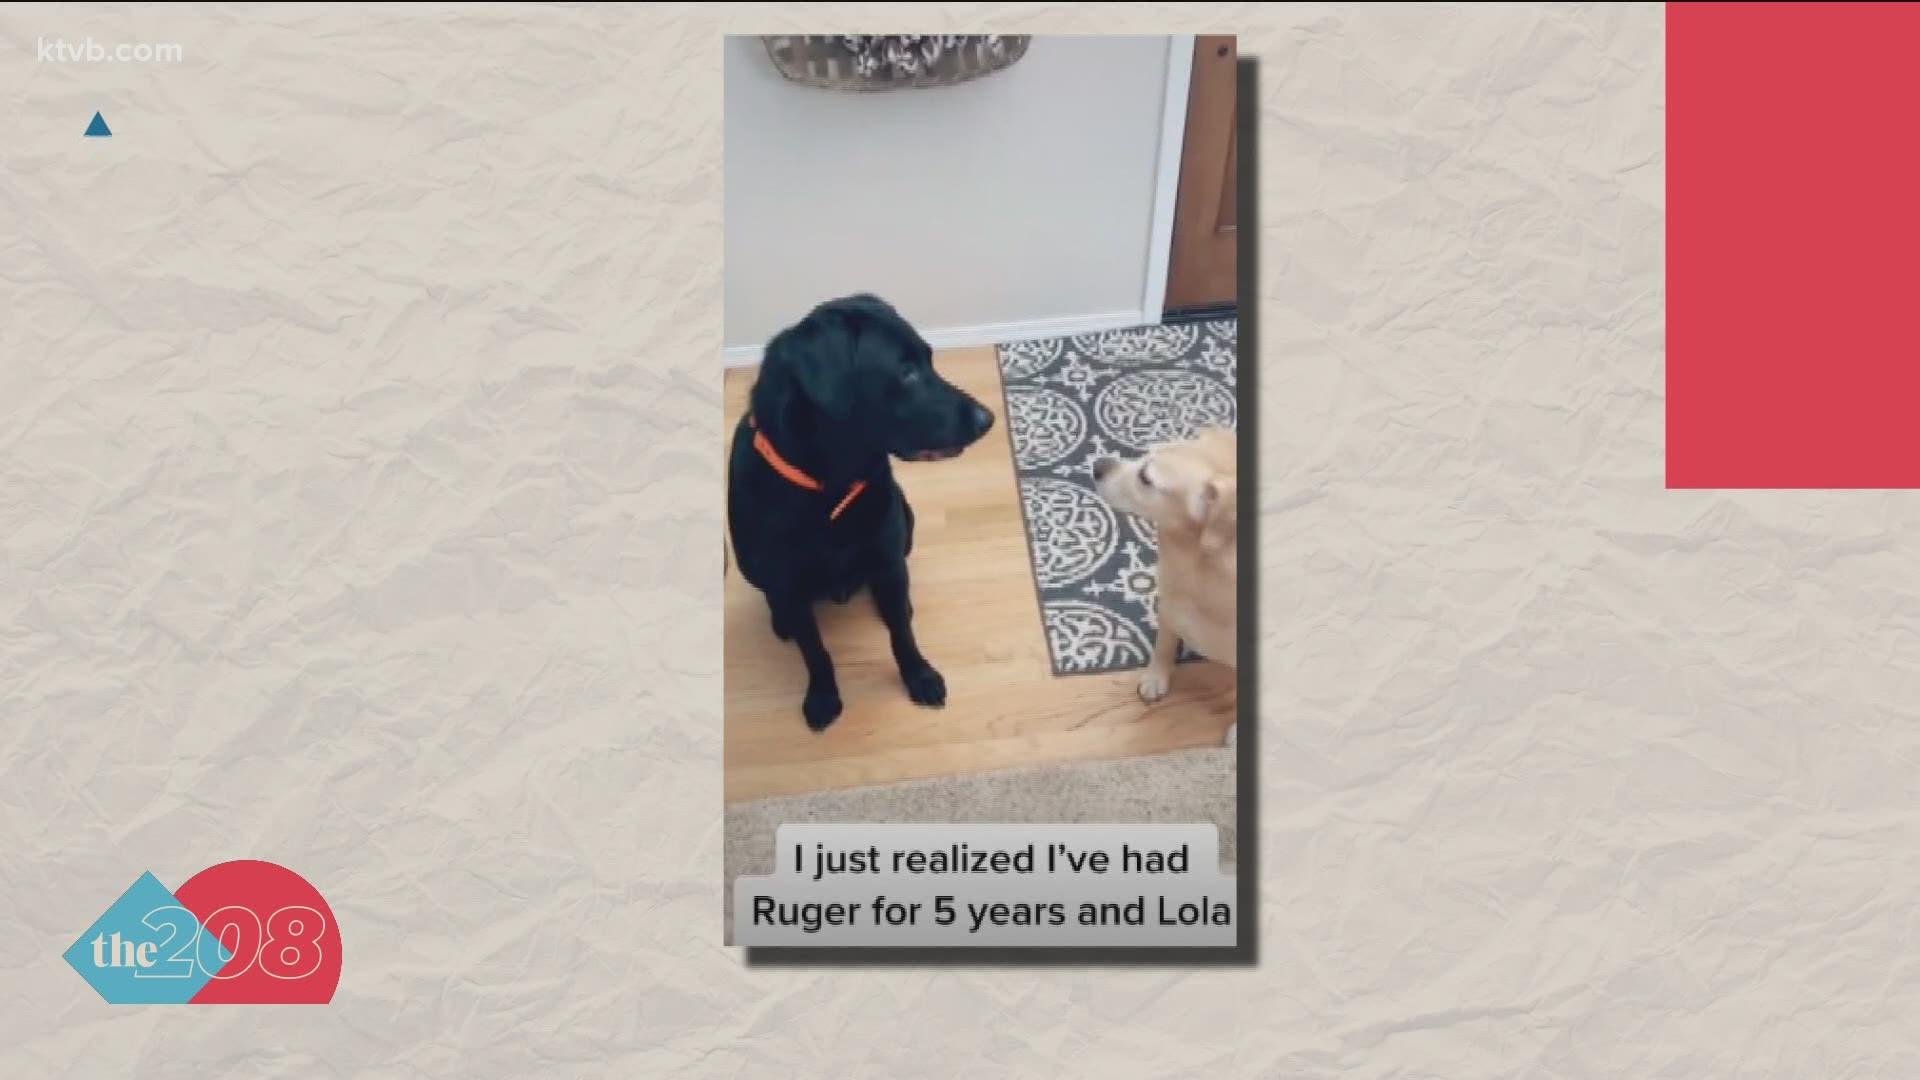 Boise dog mom Taylor shared a video of herself telling her dogs her name on the video creation app TikTok. It's been viewed more than 16 million times in 48 hours.